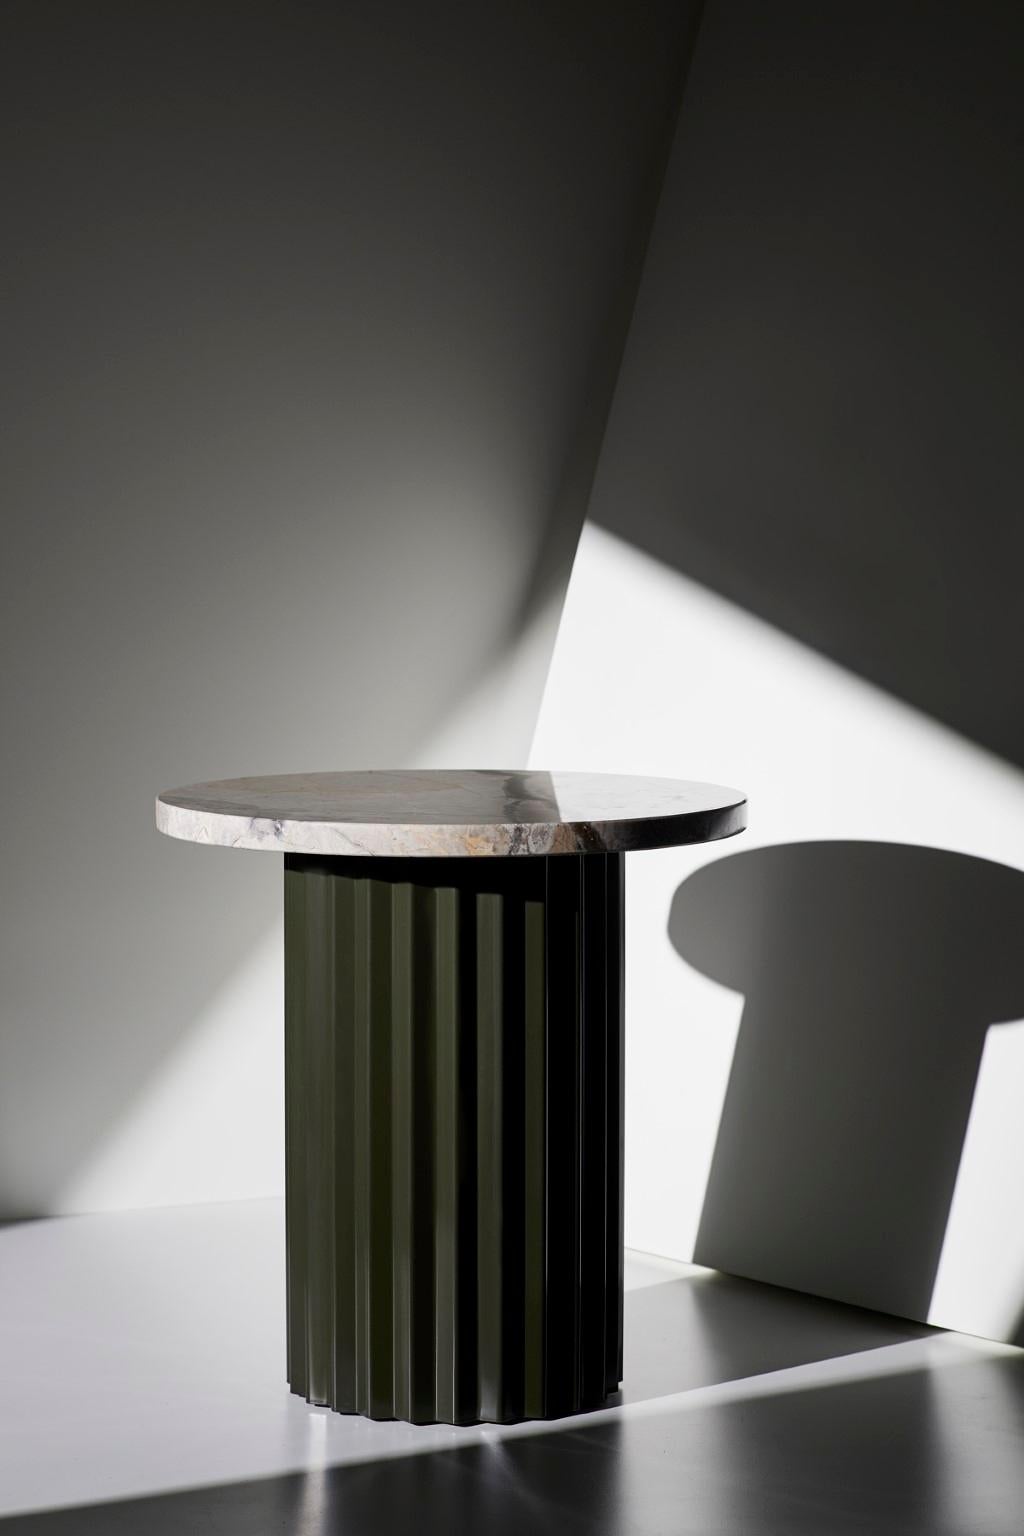 Column lounge table with marble 40 by Lisette Rützou
Dimensions: D 40 x H 41 cm
Materials: marble
Also available in Ø 60

2Lisette Rützou’s design is motivated by an urge to articulate a story. Inspired by the beauty of materials, form and